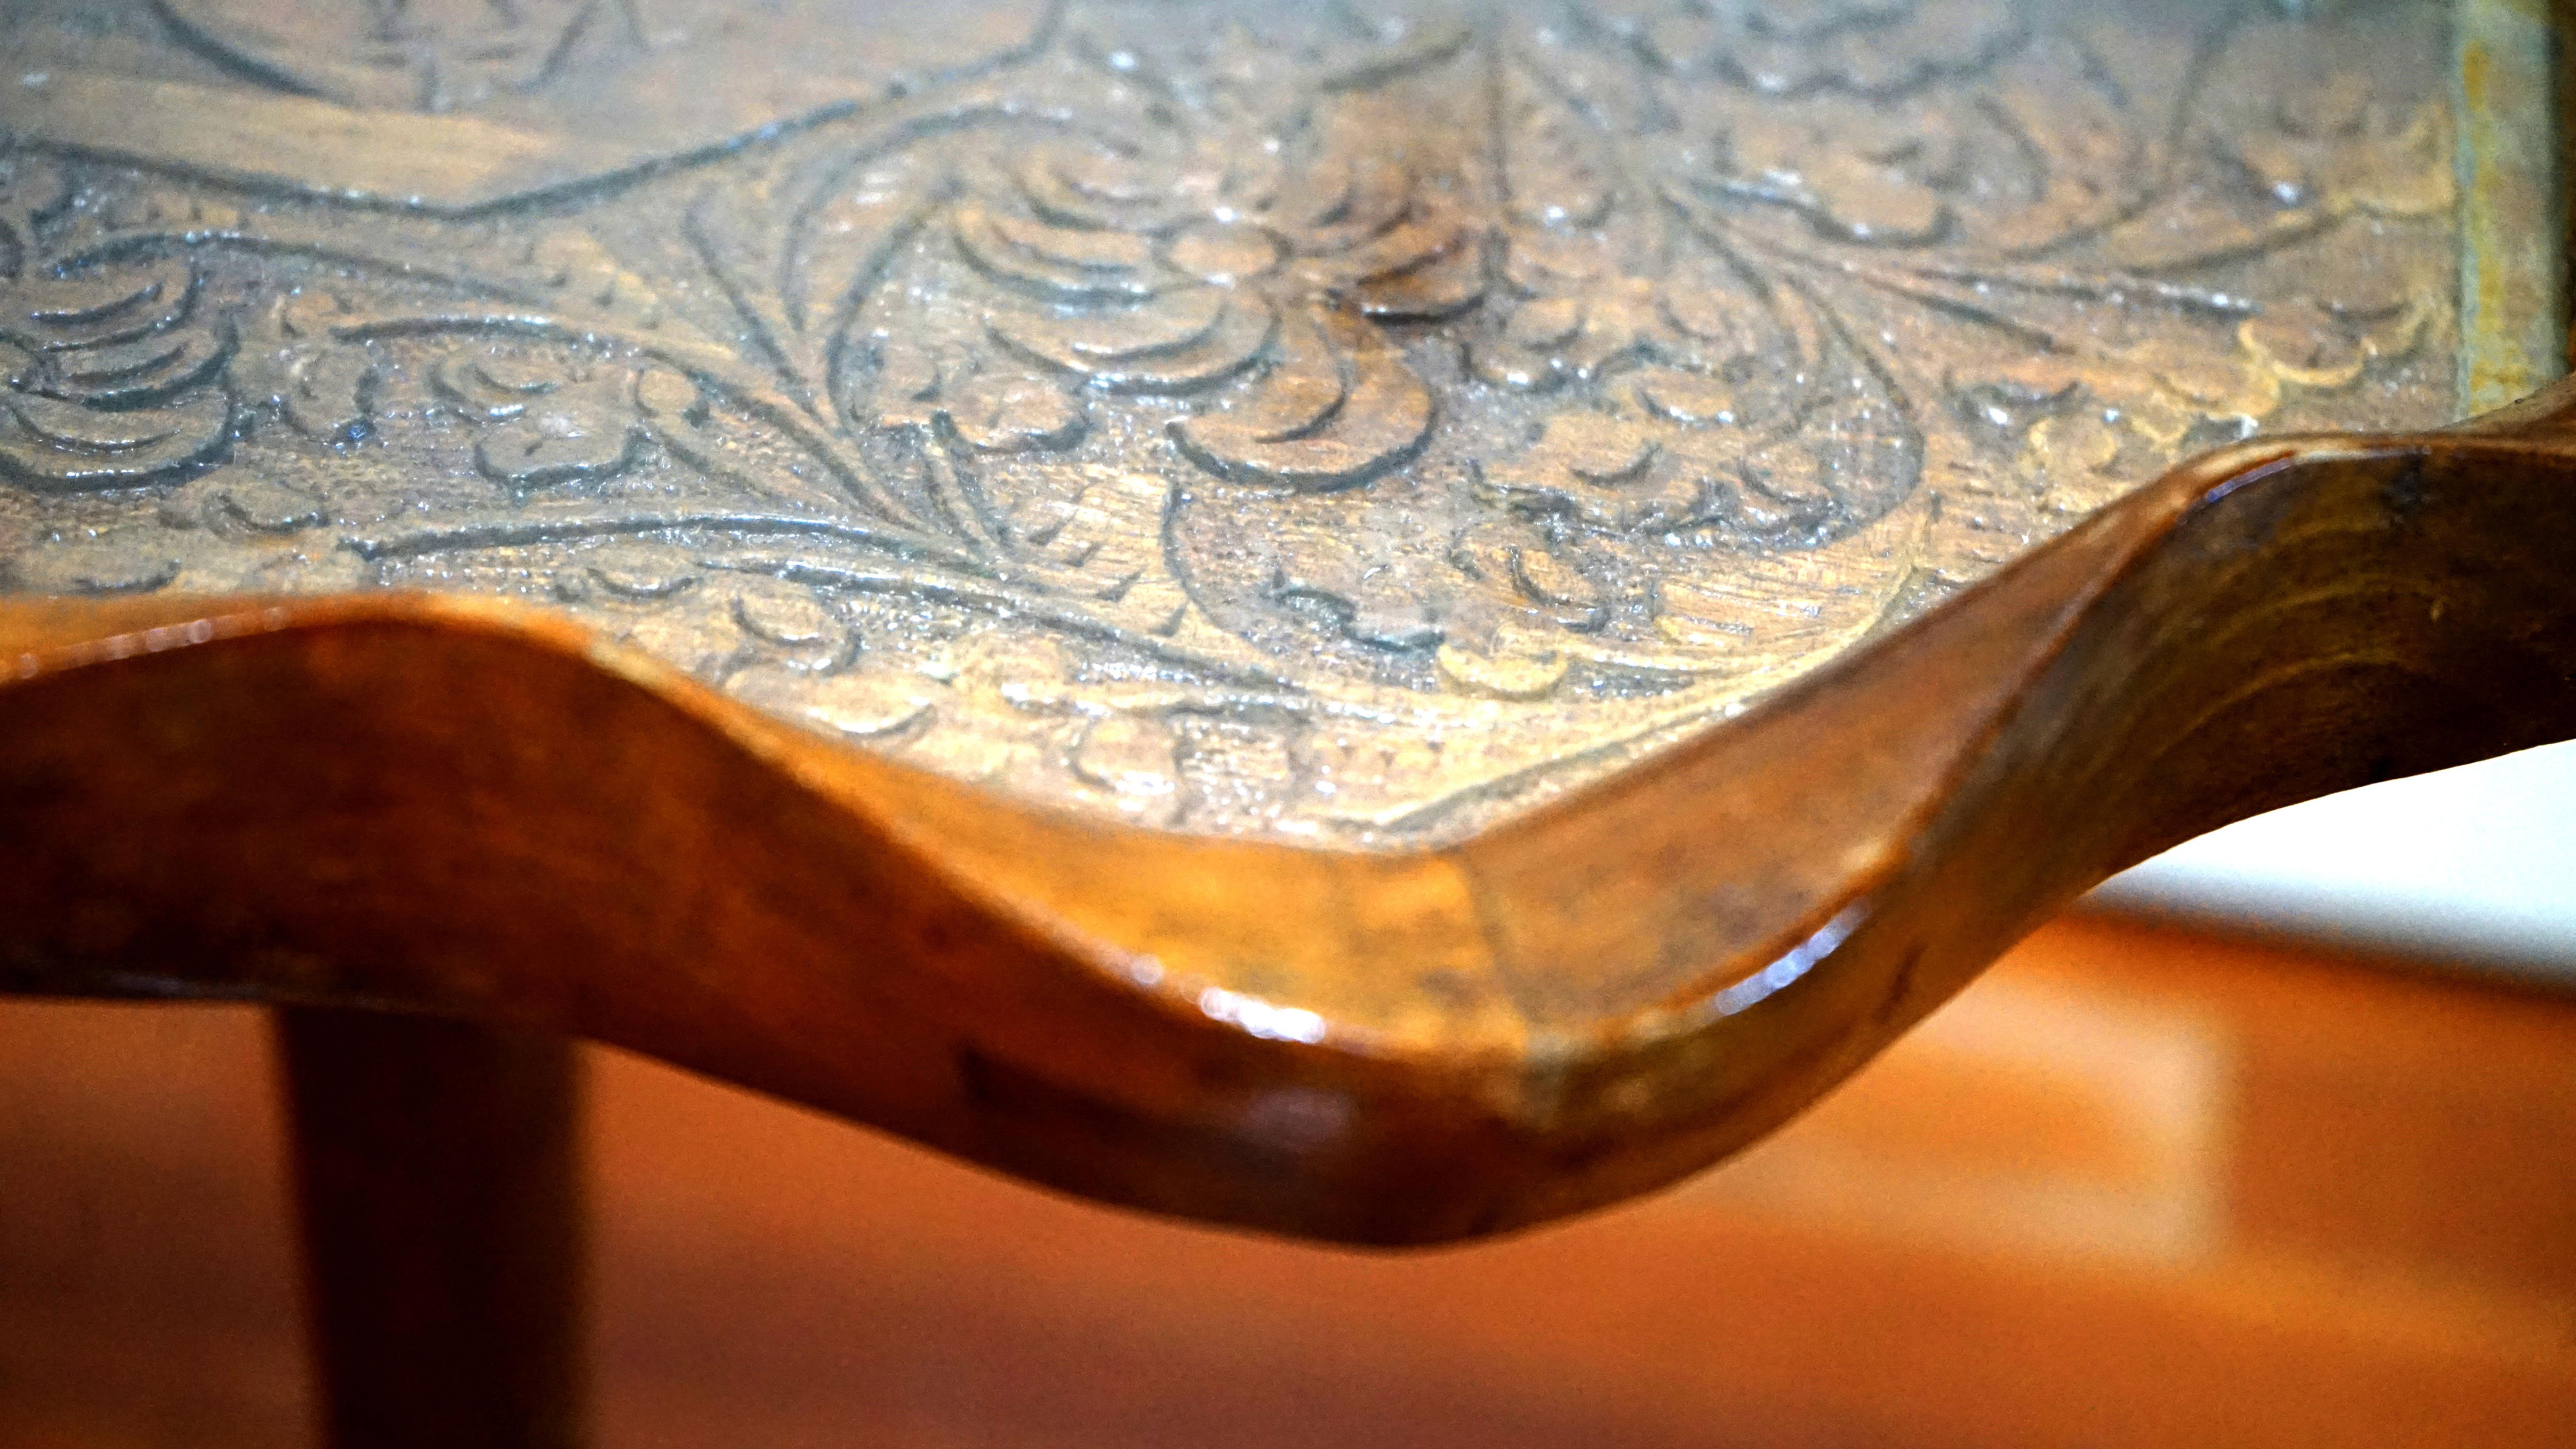 Aesthetic Movement 19th Century Collectible Maple or Walnut Hand-Carved Table with Scalloped Rim For Sale